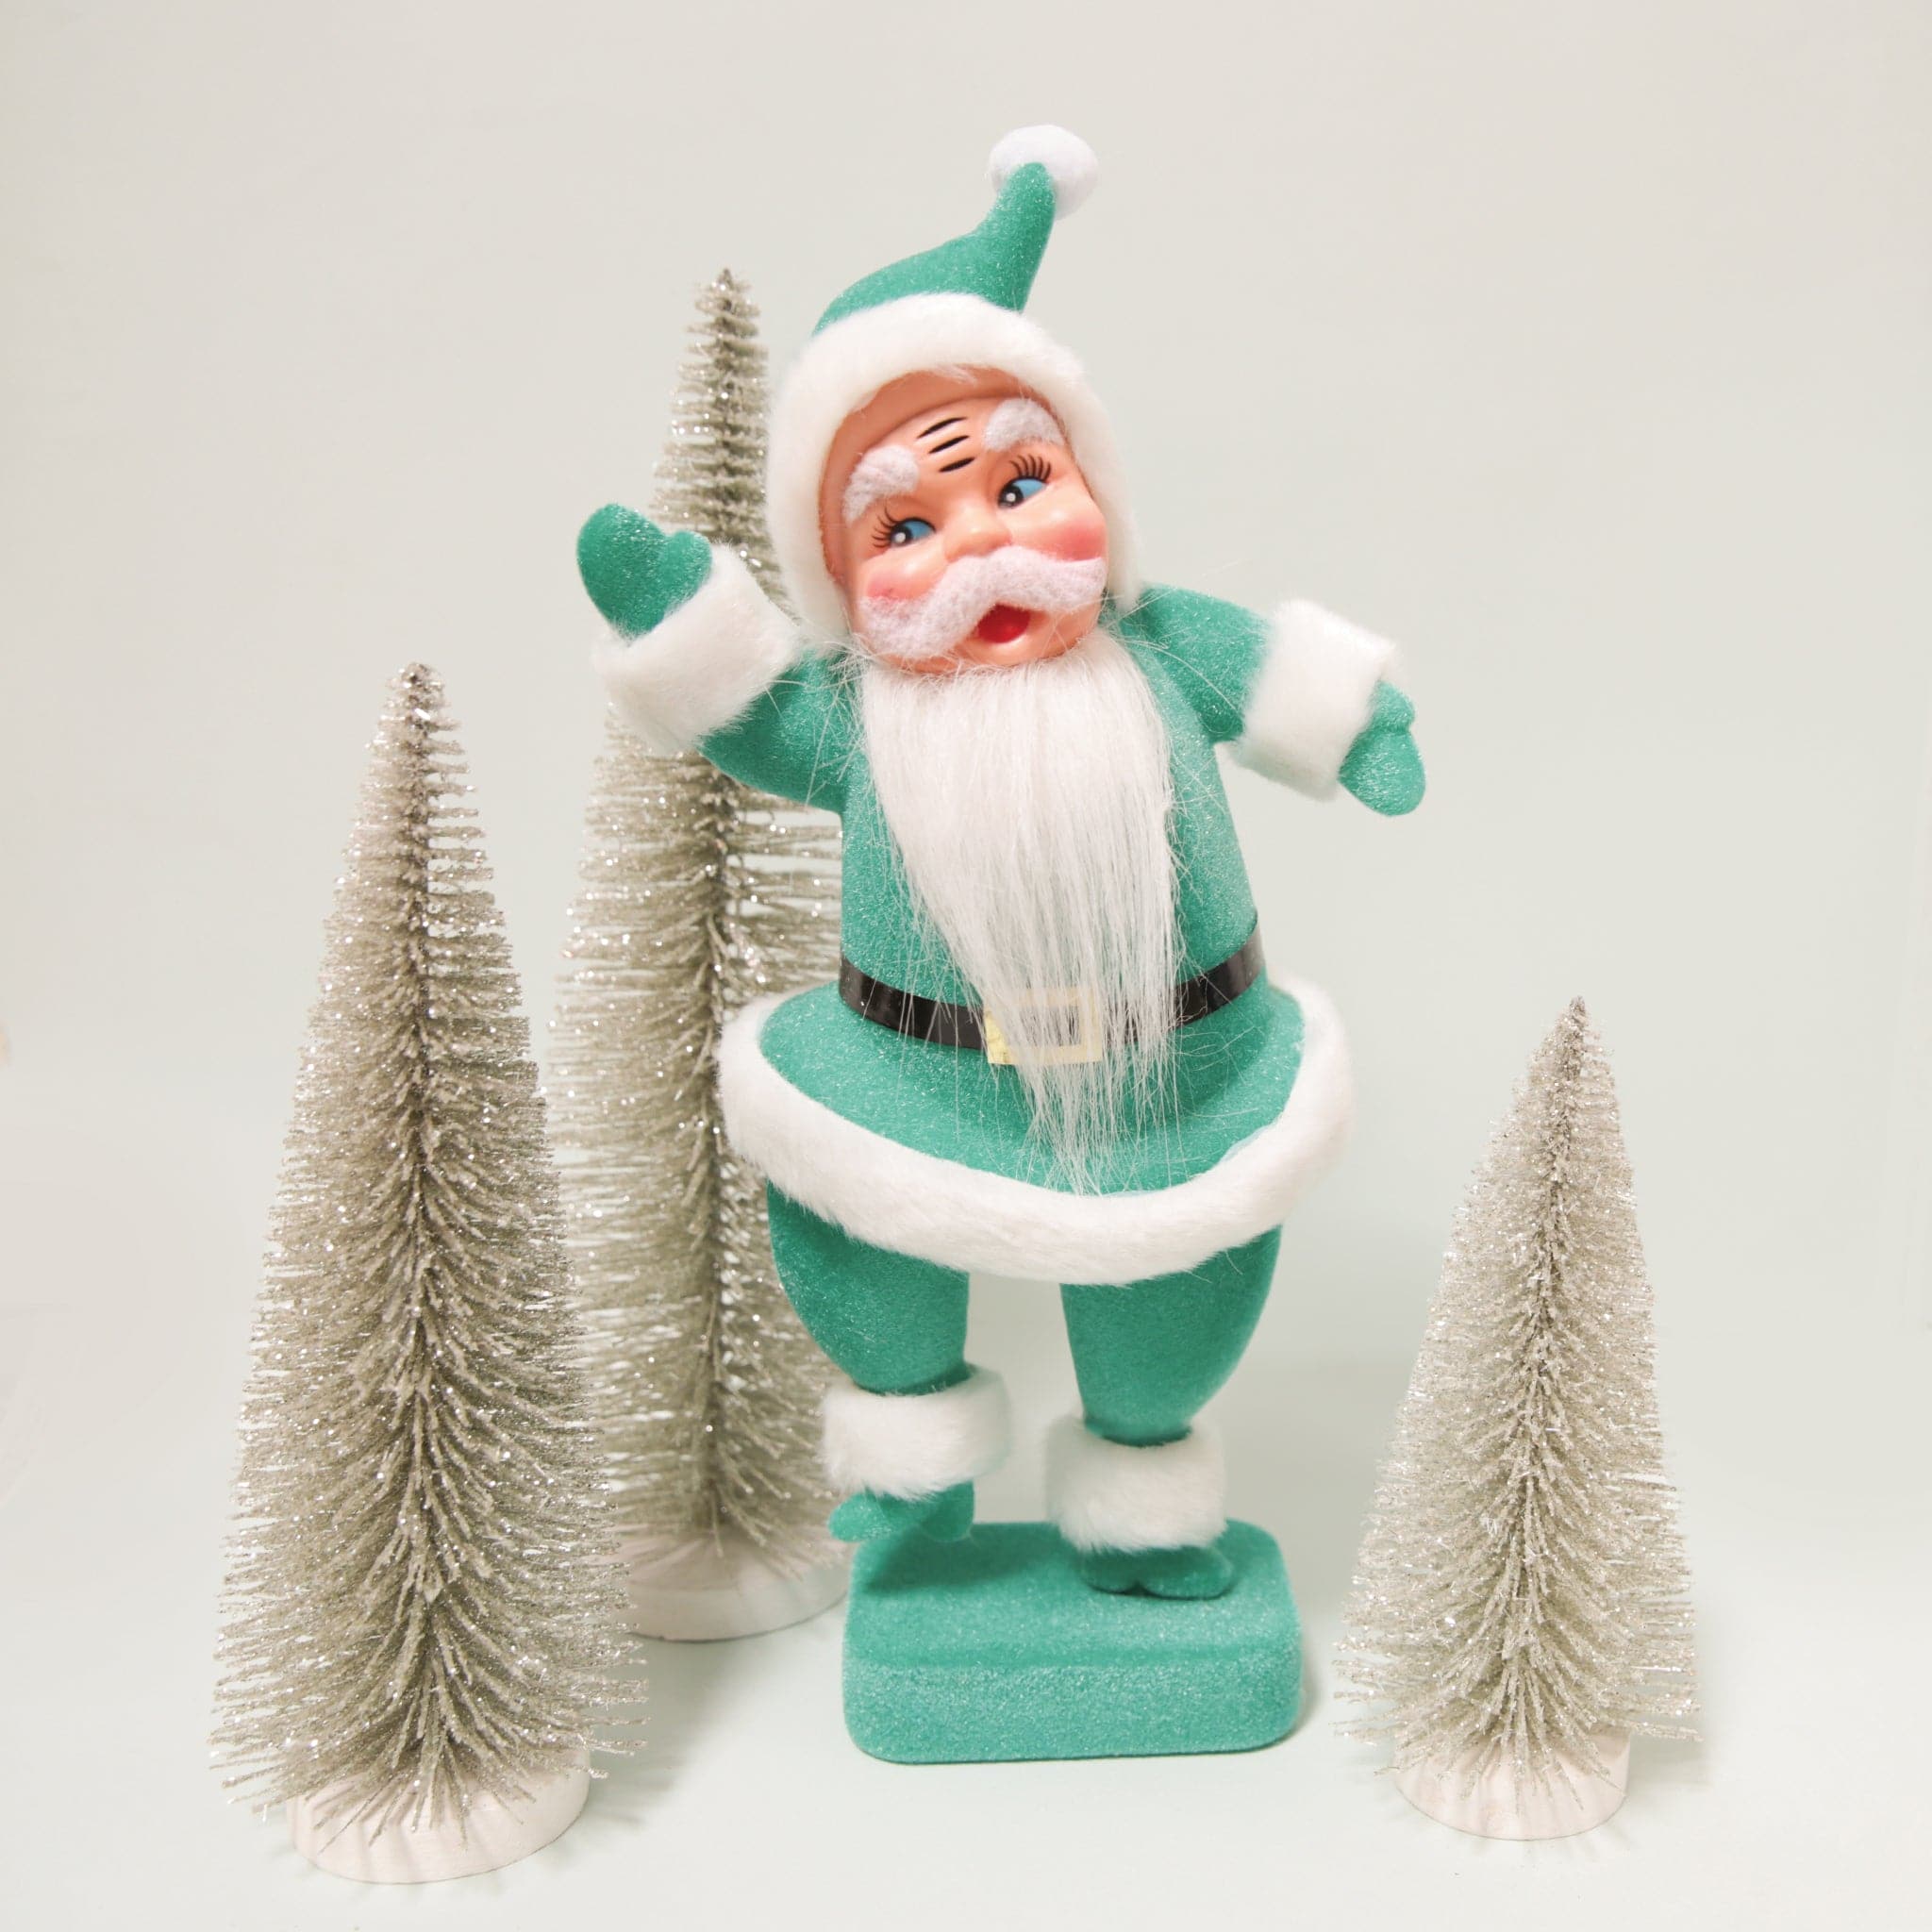 A plastic Santa figurine with a teal suit on with fuzzy cuffs and hat.